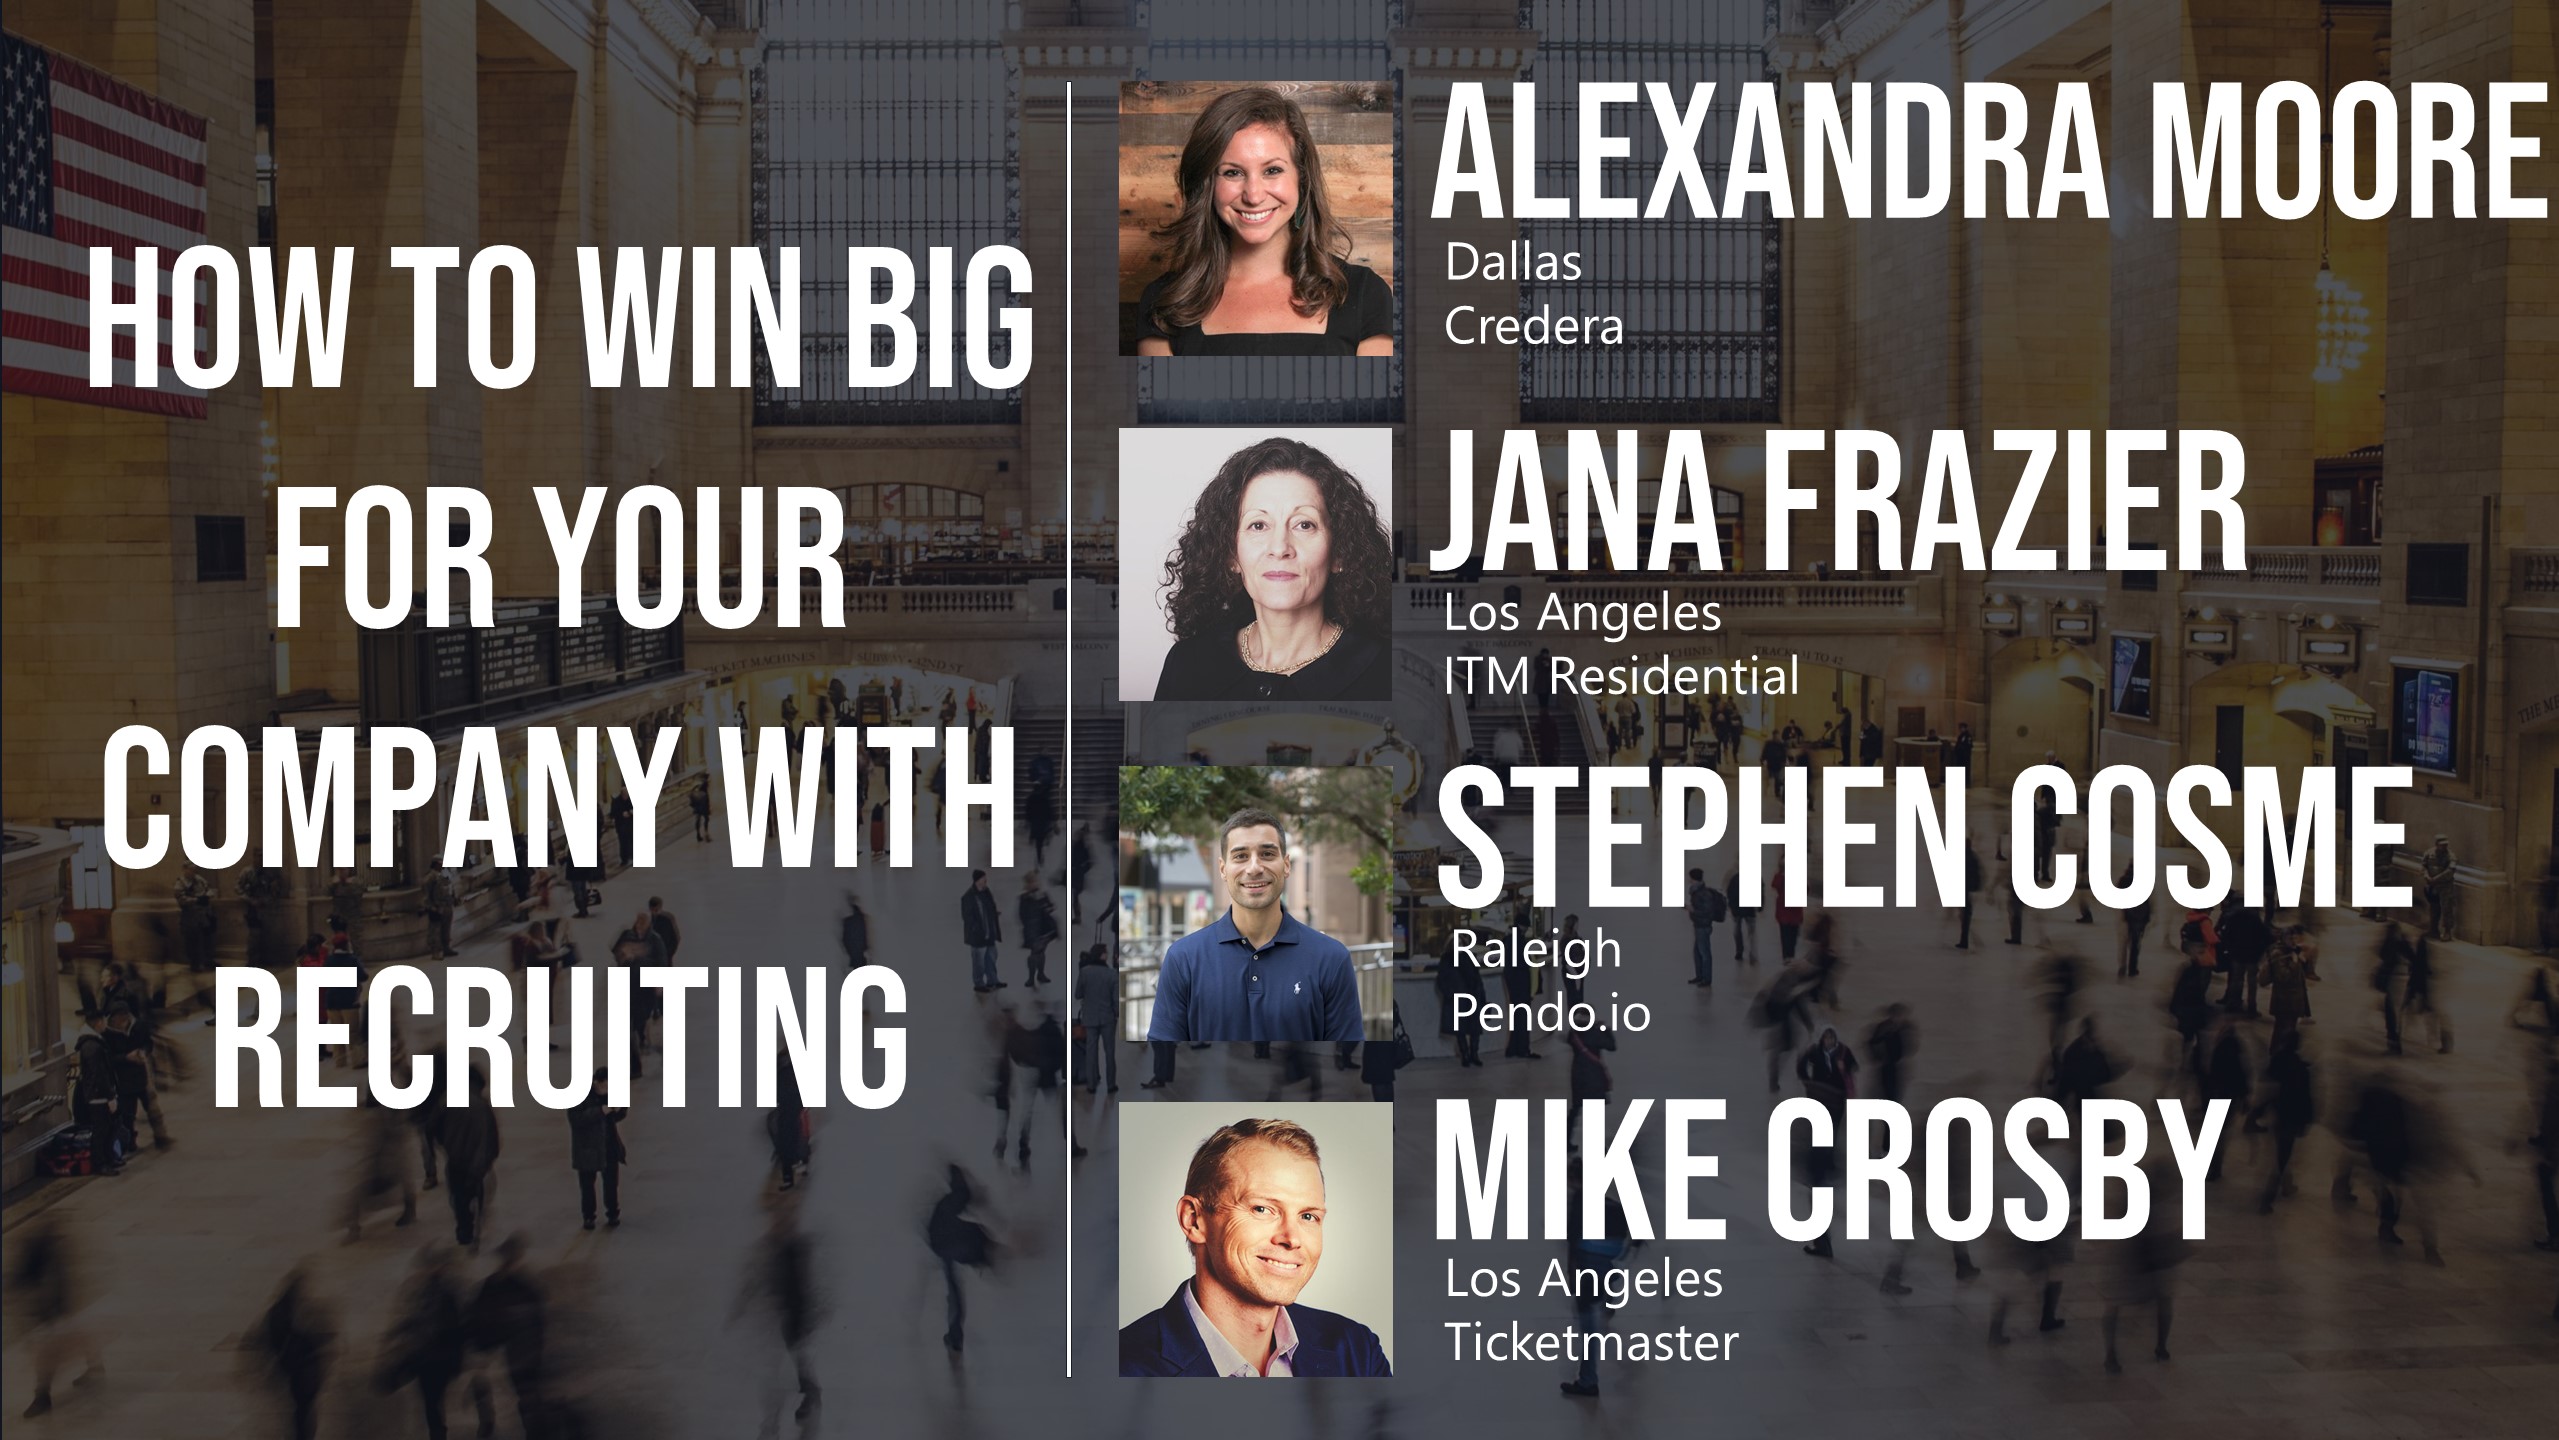 How to Win Big for Your Company With Recruiting